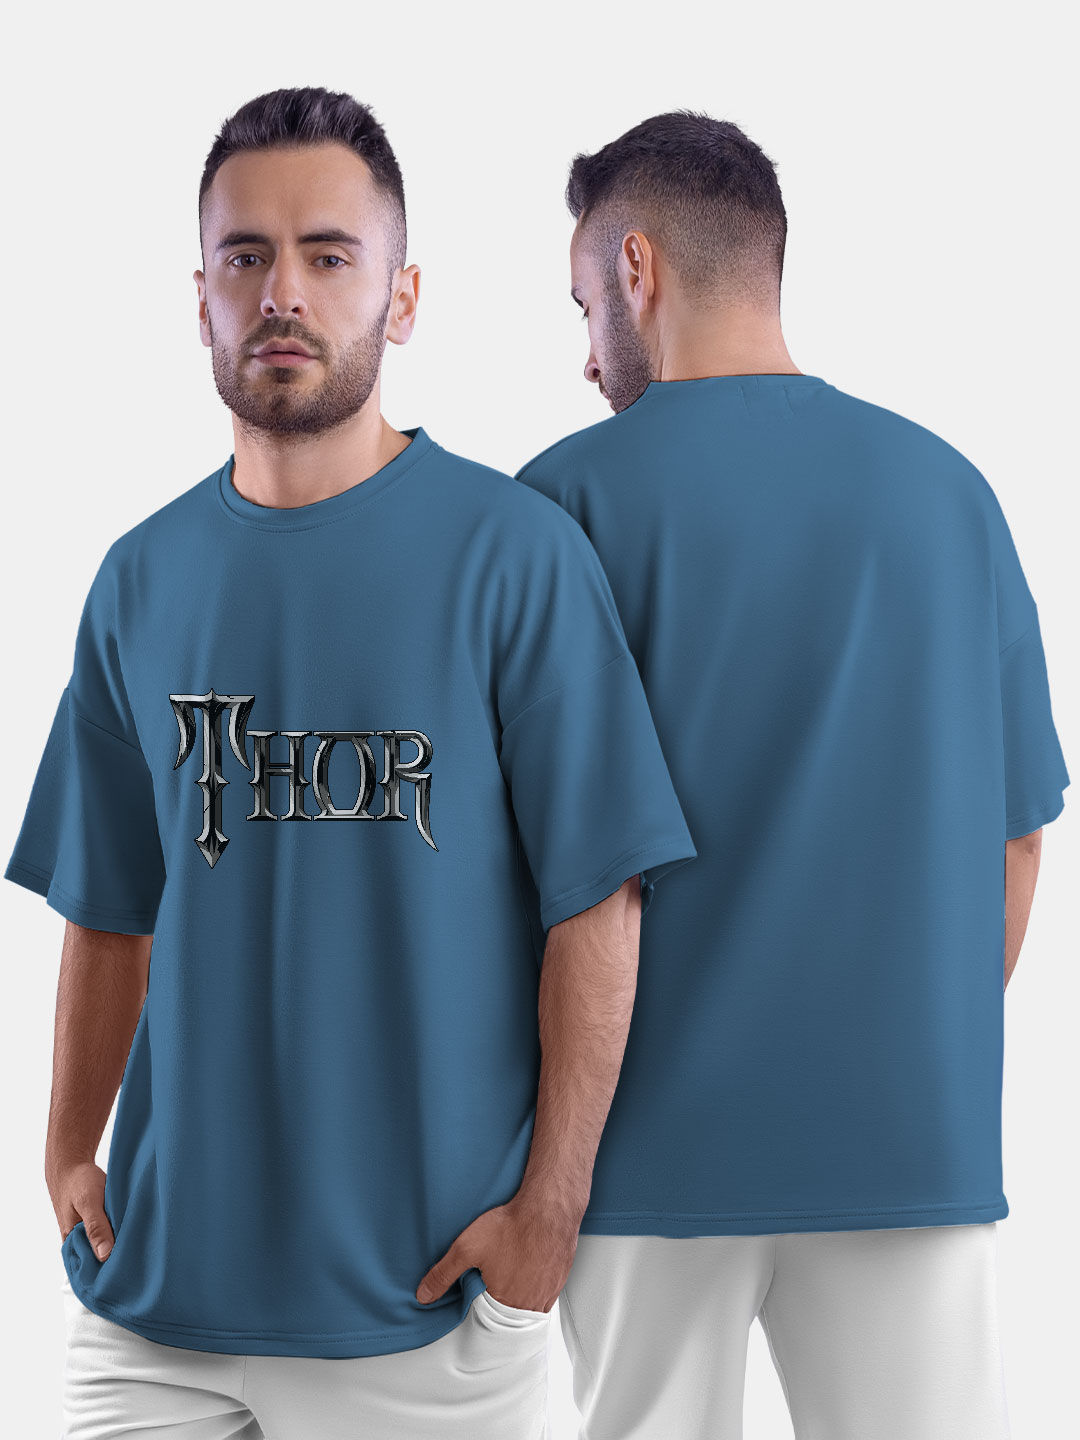 Buy Comic Thor Typo - Male Oversized T-Shirt T-Shirts Online